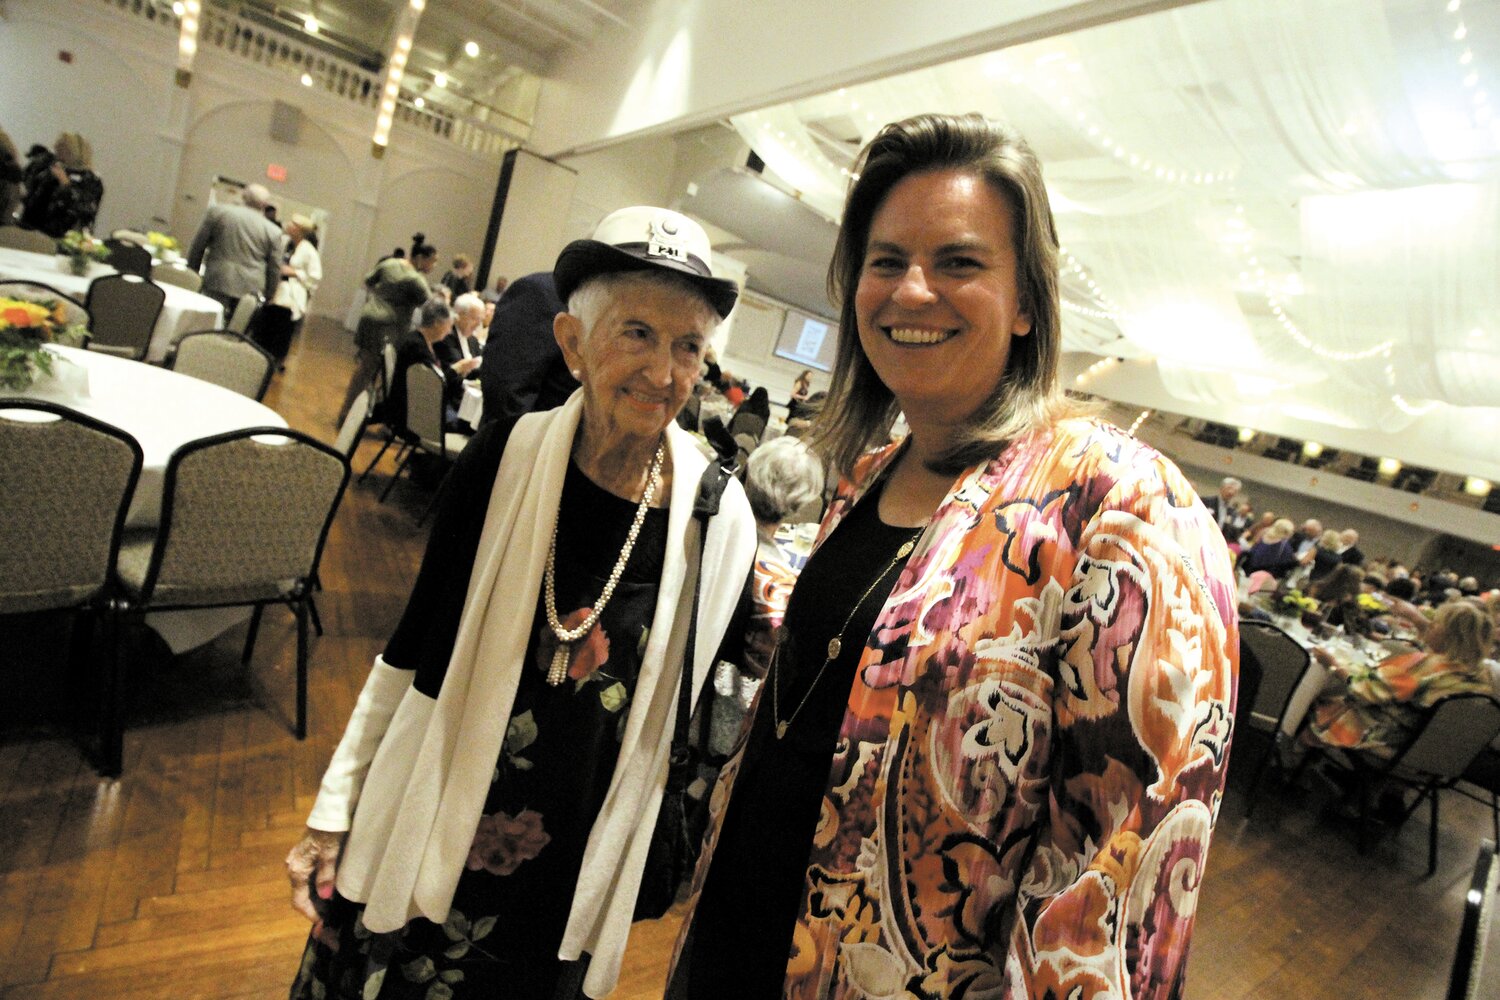 SHE MADE SURE SHE WAS SAFE: Joy Fox, who served as master of ceremonies, remembers Evelyn Blair as her crossing guard on Broad Street. Blair, now 94, didn’t retire until she was 90. When Fox singled out Blair and former crossing guard Mrs. Drum from the stage, the audience of 500 gave them a standing ovation.